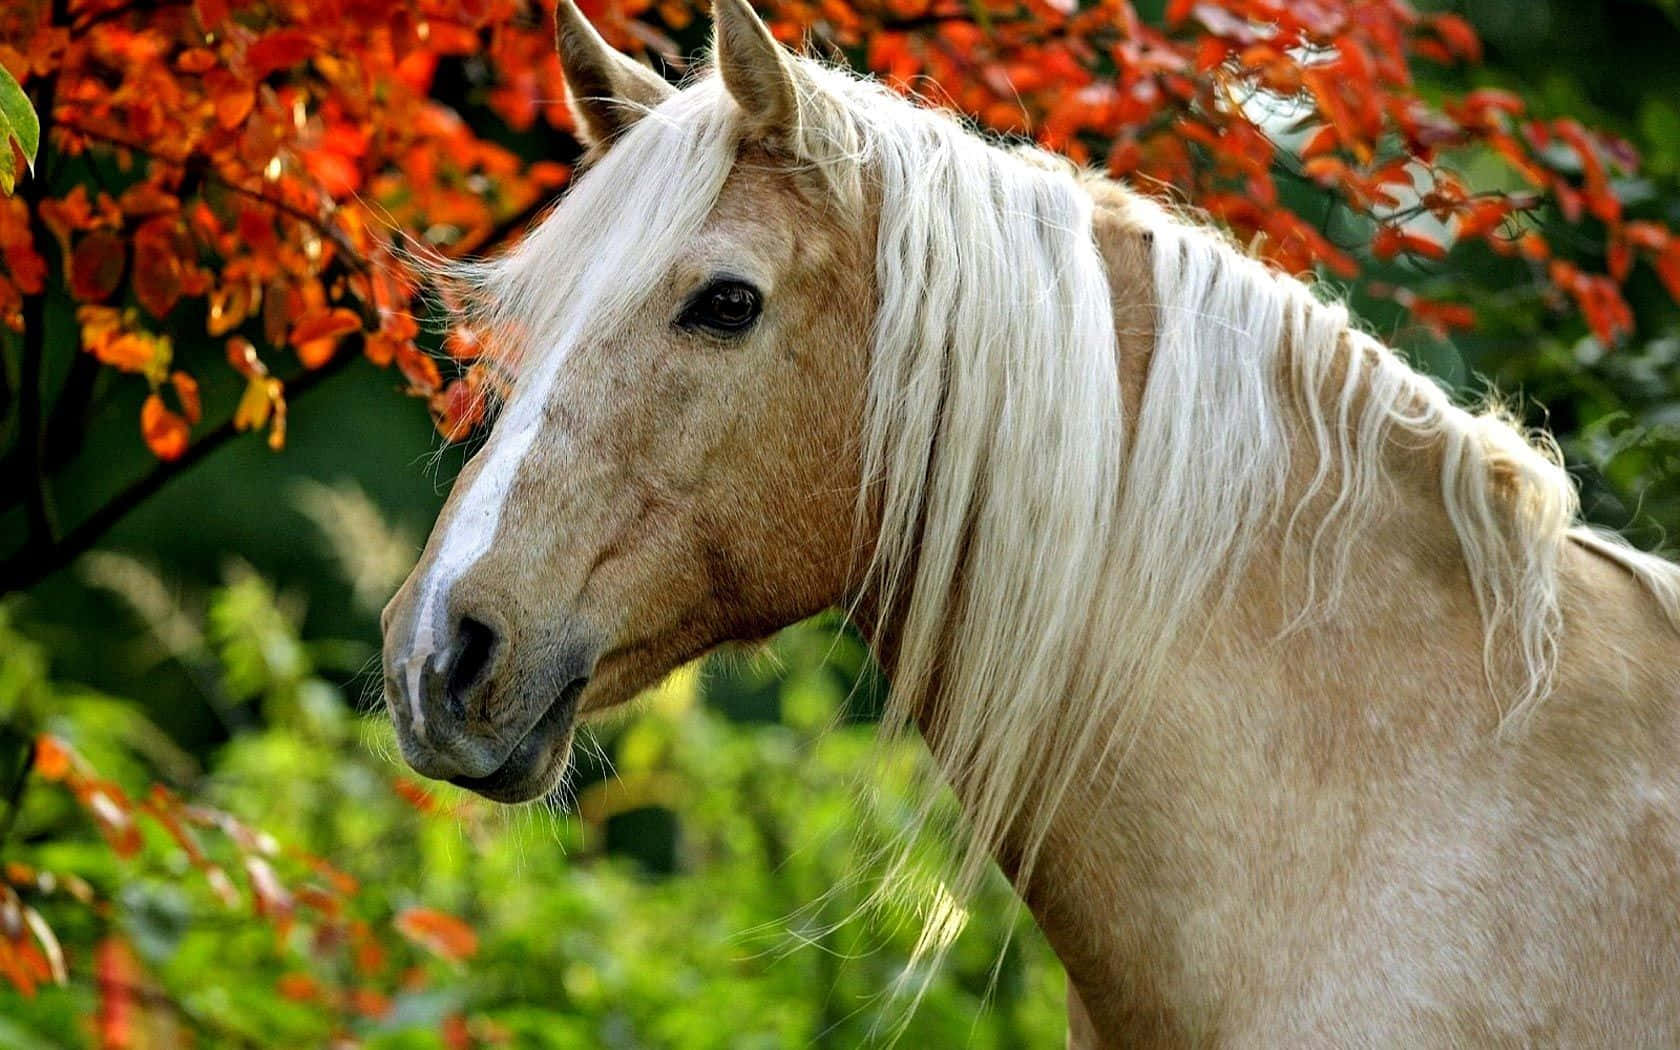 A proud and strong Palomino Horse, standing in a field